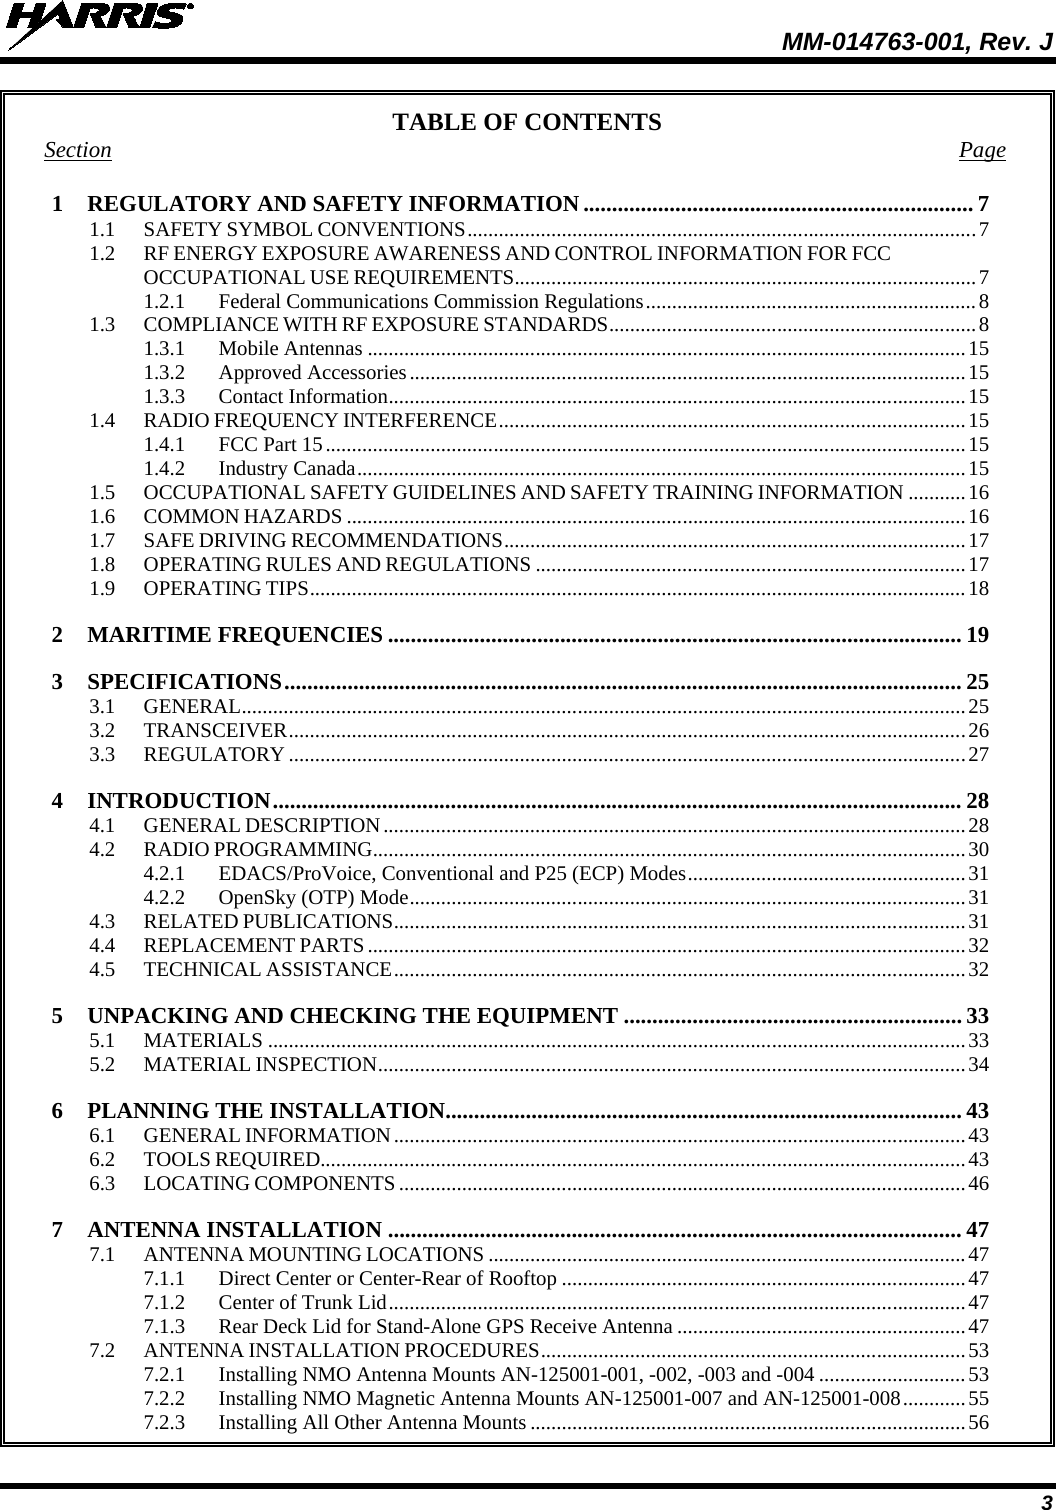  MM-014763-001, Rev. J 3 TABLE OF CONTENTS Section Page 1 REGULATORY AND SAFETY INFORMATION .................................................................... 7 1.1 SAFETY SYMBOL CONVENTIONS ................................................................................................. 7 1.2 RF ENERGY EXPOSURE AWARENESS AND CONTROL INFORMATION FOR FCC OCCUPATIONAL USE REQUIREMENTS ........................................................................................ 7 1.2.1 Federal Communications Commission Regulations ............................................................... 8 1.3 COMPLIANCE WITH RF EXPOSURE STANDARDS ...................................................................... 8 1.3.1 Mobile Antennas .................................................................................................................. 15 1.3.2 Approved Accessories .......................................................................................................... 15 1.3.3 Contact Information .............................................................................................................. 15 1.4 RADIO FREQUENCY INTERFERENCE ......................................................................................... 15 1.4.1 FCC Part 15 .......................................................................................................................... 15 1.4.2 Industry Canada .................................................................................................................... 15 1.5 OCCUPATIONAL SAFETY GUIDELINES AND SAFETY TRAINING INFORMATION ........... 16 1.6 COMMON HAZARDS ...................................................................................................................... 16 1.7 SAFE DRIVING RECOMMENDATIONS ........................................................................................ 17 1.8 OPERATING RULES AND REGULATIONS .................................................................................. 17 1.9 OPERATING TIPS ............................................................................................................................. 18 2 MARITIME FREQUENCIES .................................................................................................... 19 3 SPECIFICATIONS ...................................................................................................................... 25 3.1 GENERAL .......................................................................................................................................... 25 3.2 TRANSCEIVER ................................................................................................................................. 26 3.3 REGULATORY ................................................................................................................................. 27 4 INTRODUCTION ........................................................................................................................ 28 4.1 GENERAL DESCRIPTION ............................................................................................................... 28 4.2 RADIO PROGRAMMING ................................................................................................................. 30 4.2.1 EDACS/ProVoice, Conventional and P25 (ECP) Modes ..................................................... 31 4.2.2 OpenSky (OTP) Mode .......................................................................................................... 31 4.3 RELATED PUBLICATIONS ............................................................................................................. 31 4.4 REPLACEMENT PARTS .................................................................................................................. 32 4.5 TECHNICAL ASSISTANCE ............................................................................................................. 32 5 UNPACKING AND CHECKING THE EQUIPMENT ........................................................... 33 5.1 MATERIALS ..................................................................................................................................... 33 5.2 MATERIAL INSPECTION ................................................................................................................ 34 6 PLANNING THE INSTALLATION.......................................................................................... 43 6.1 GENERAL INFORMATION ............................................................................................................. 43 6.2 TOOLS REQUIRED........................................................................................................................... 43 6.3 LOCATING COMPONENTS ............................................................................................................ 46 7 ANTENNA INSTALLATION .................................................................................................... 47 7.1 ANTENNA MOUNTING LOCATIONS ........................................................................................... 47 7.1.1 Direct Center or Center-Rear of Rooftop ............................................................................. 47 7.1.2 Center of Trunk Lid .............................................................................................................. 47 7.1.3 Rear Deck Lid for Stand-Alone GPS Receive Antenna ....................................................... 47 7.2 ANTENNA INSTALLATION PROCEDURES ................................................................................. 53 7.2.1 Installing NMO Antenna Mounts AN-125001-001, -002, -003 and -004 ............................ 53 7.2.2 Installing NMO Magnetic Antenna Mounts AN-125001-007 and AN-125001-008 ............ 55 7.2.3 Installing All Other Antenna Mounts ................................................................................... 56 